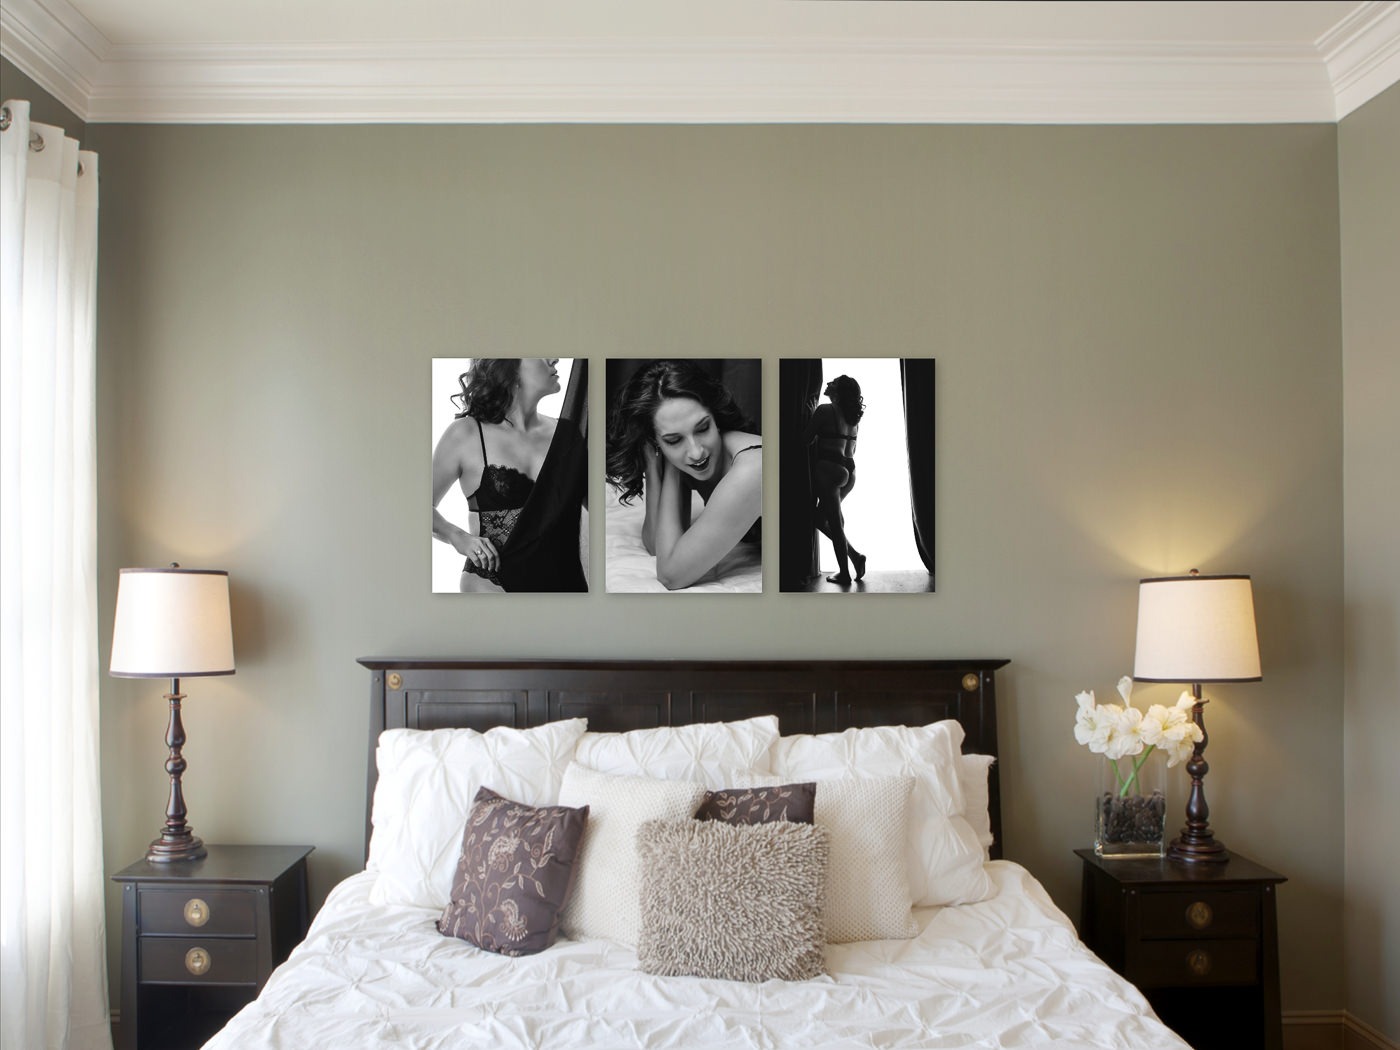 Black & white boudoir images on display as fine art on metals over master bedroom bed